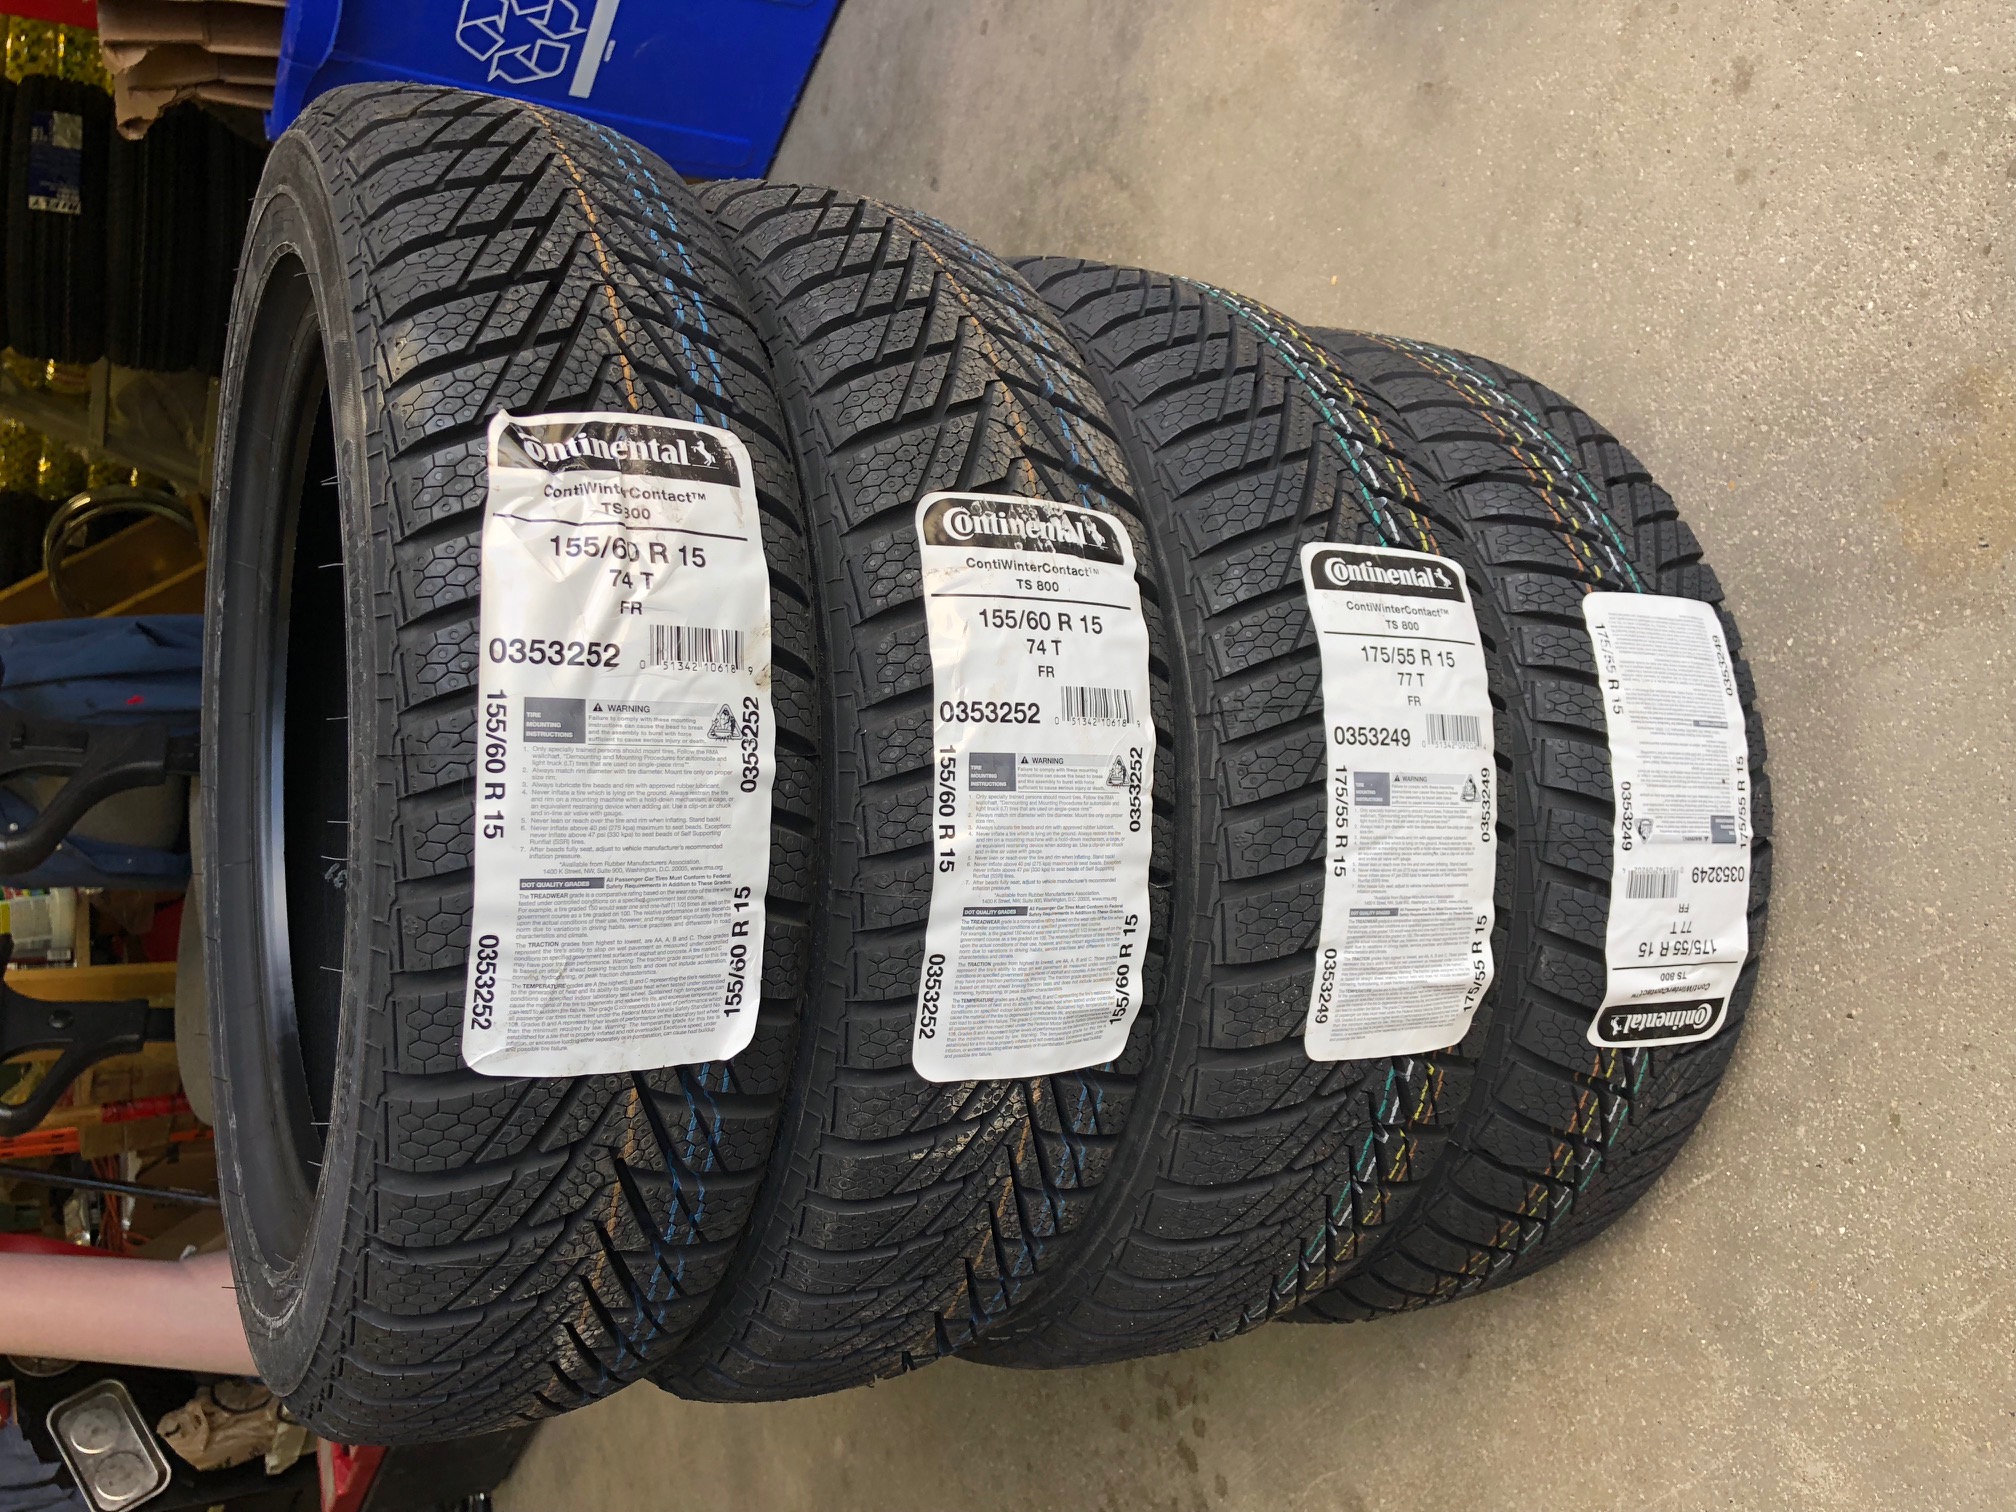 ContiWinterContact TS800 Studless Ice & Snow winter SET OF 4  2 x 155/60R-15  2 x 175/55RR-15